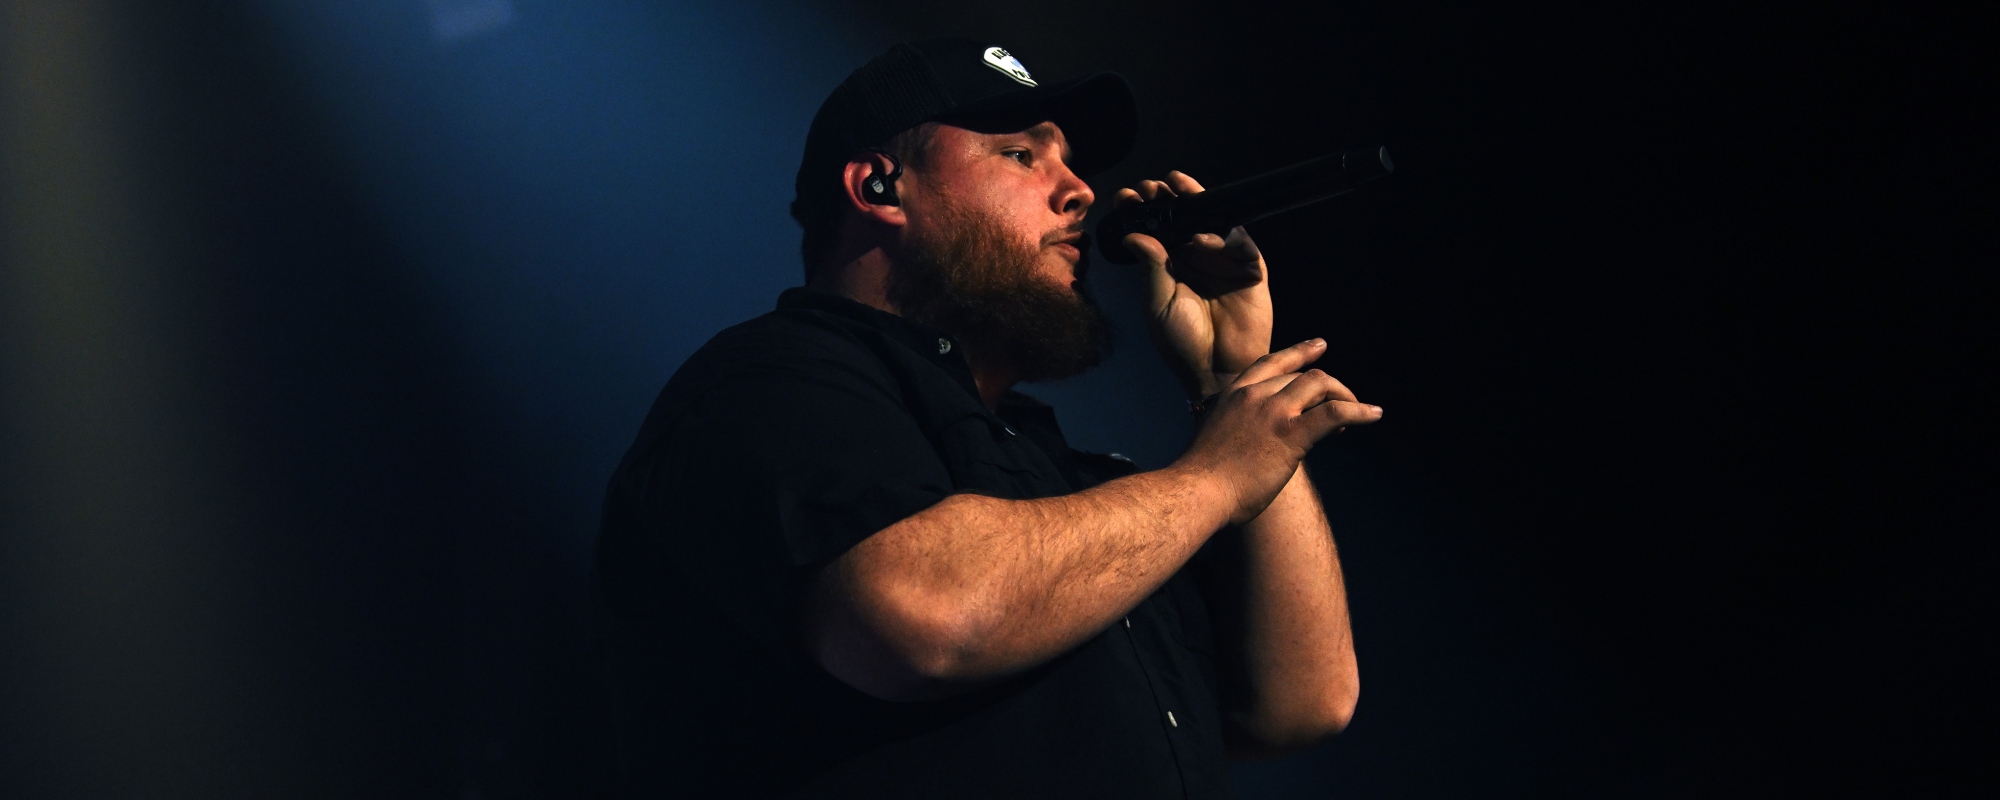 Luke Combs Featured On ‘Twisters’ Soundtrack with New Song “Ain’t No Love In Oklahoma”